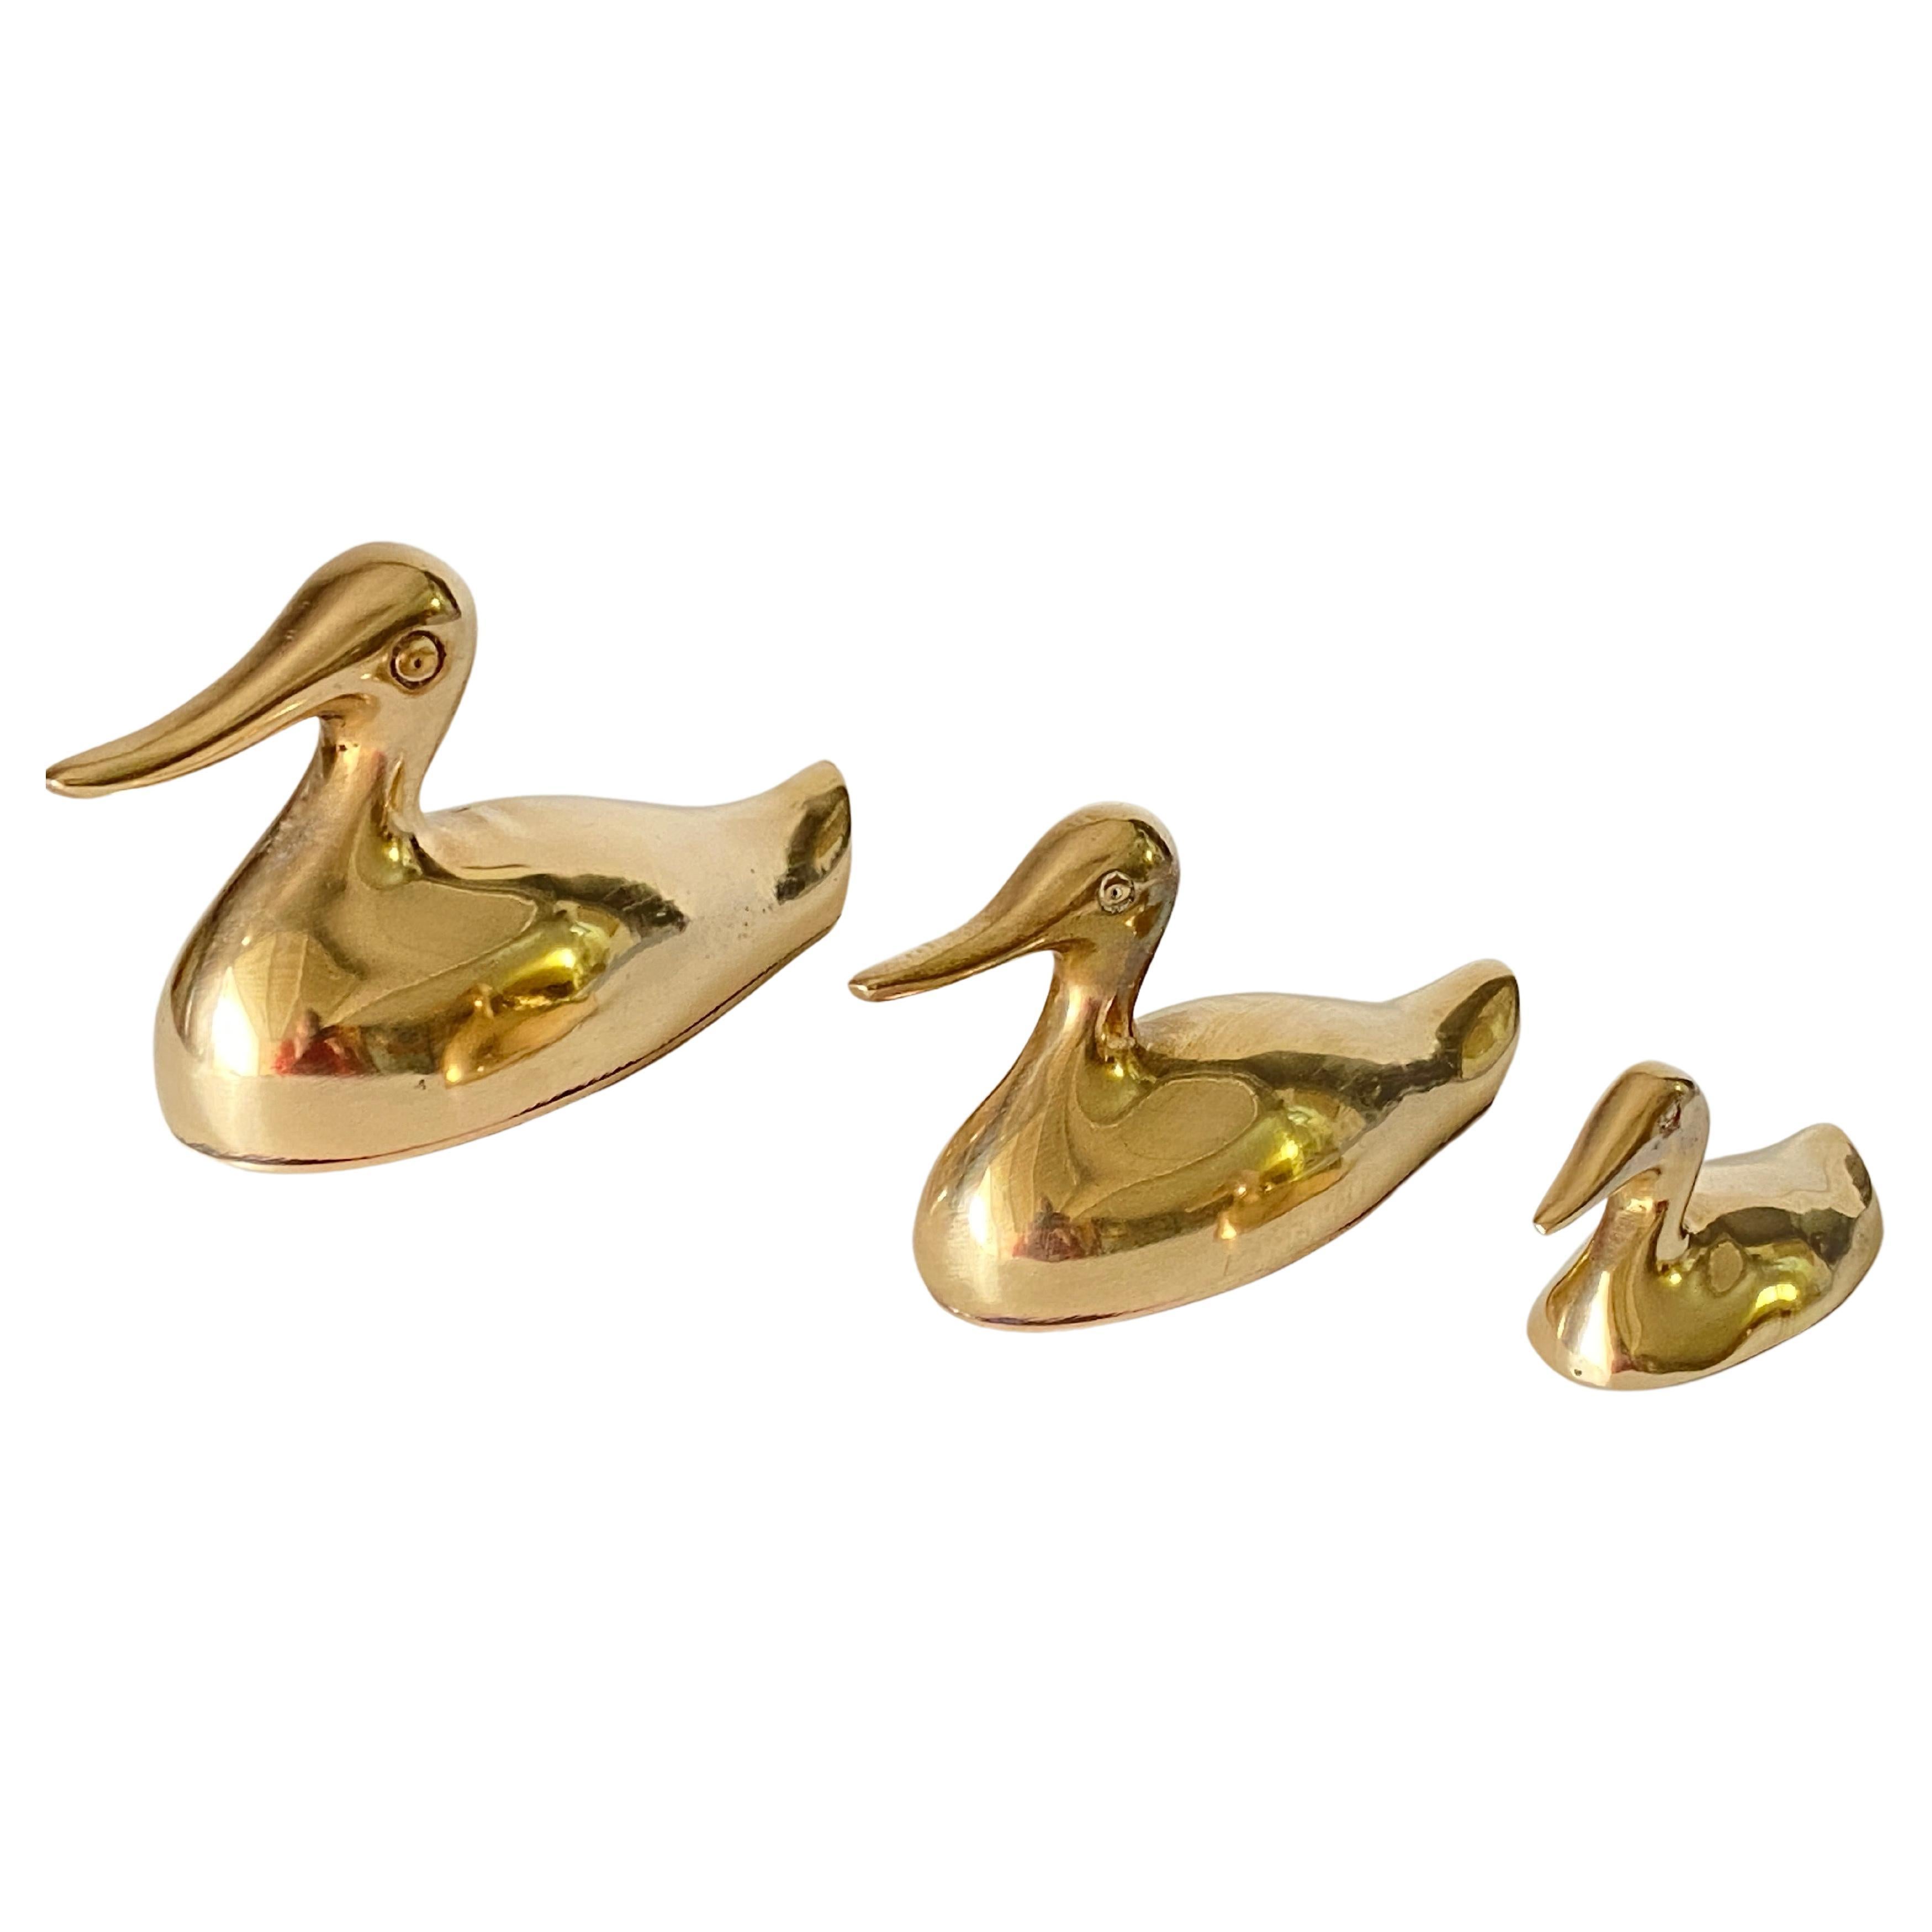 Decorative Set of 3 Sculptures Shaped, in Brass, France, 1970s